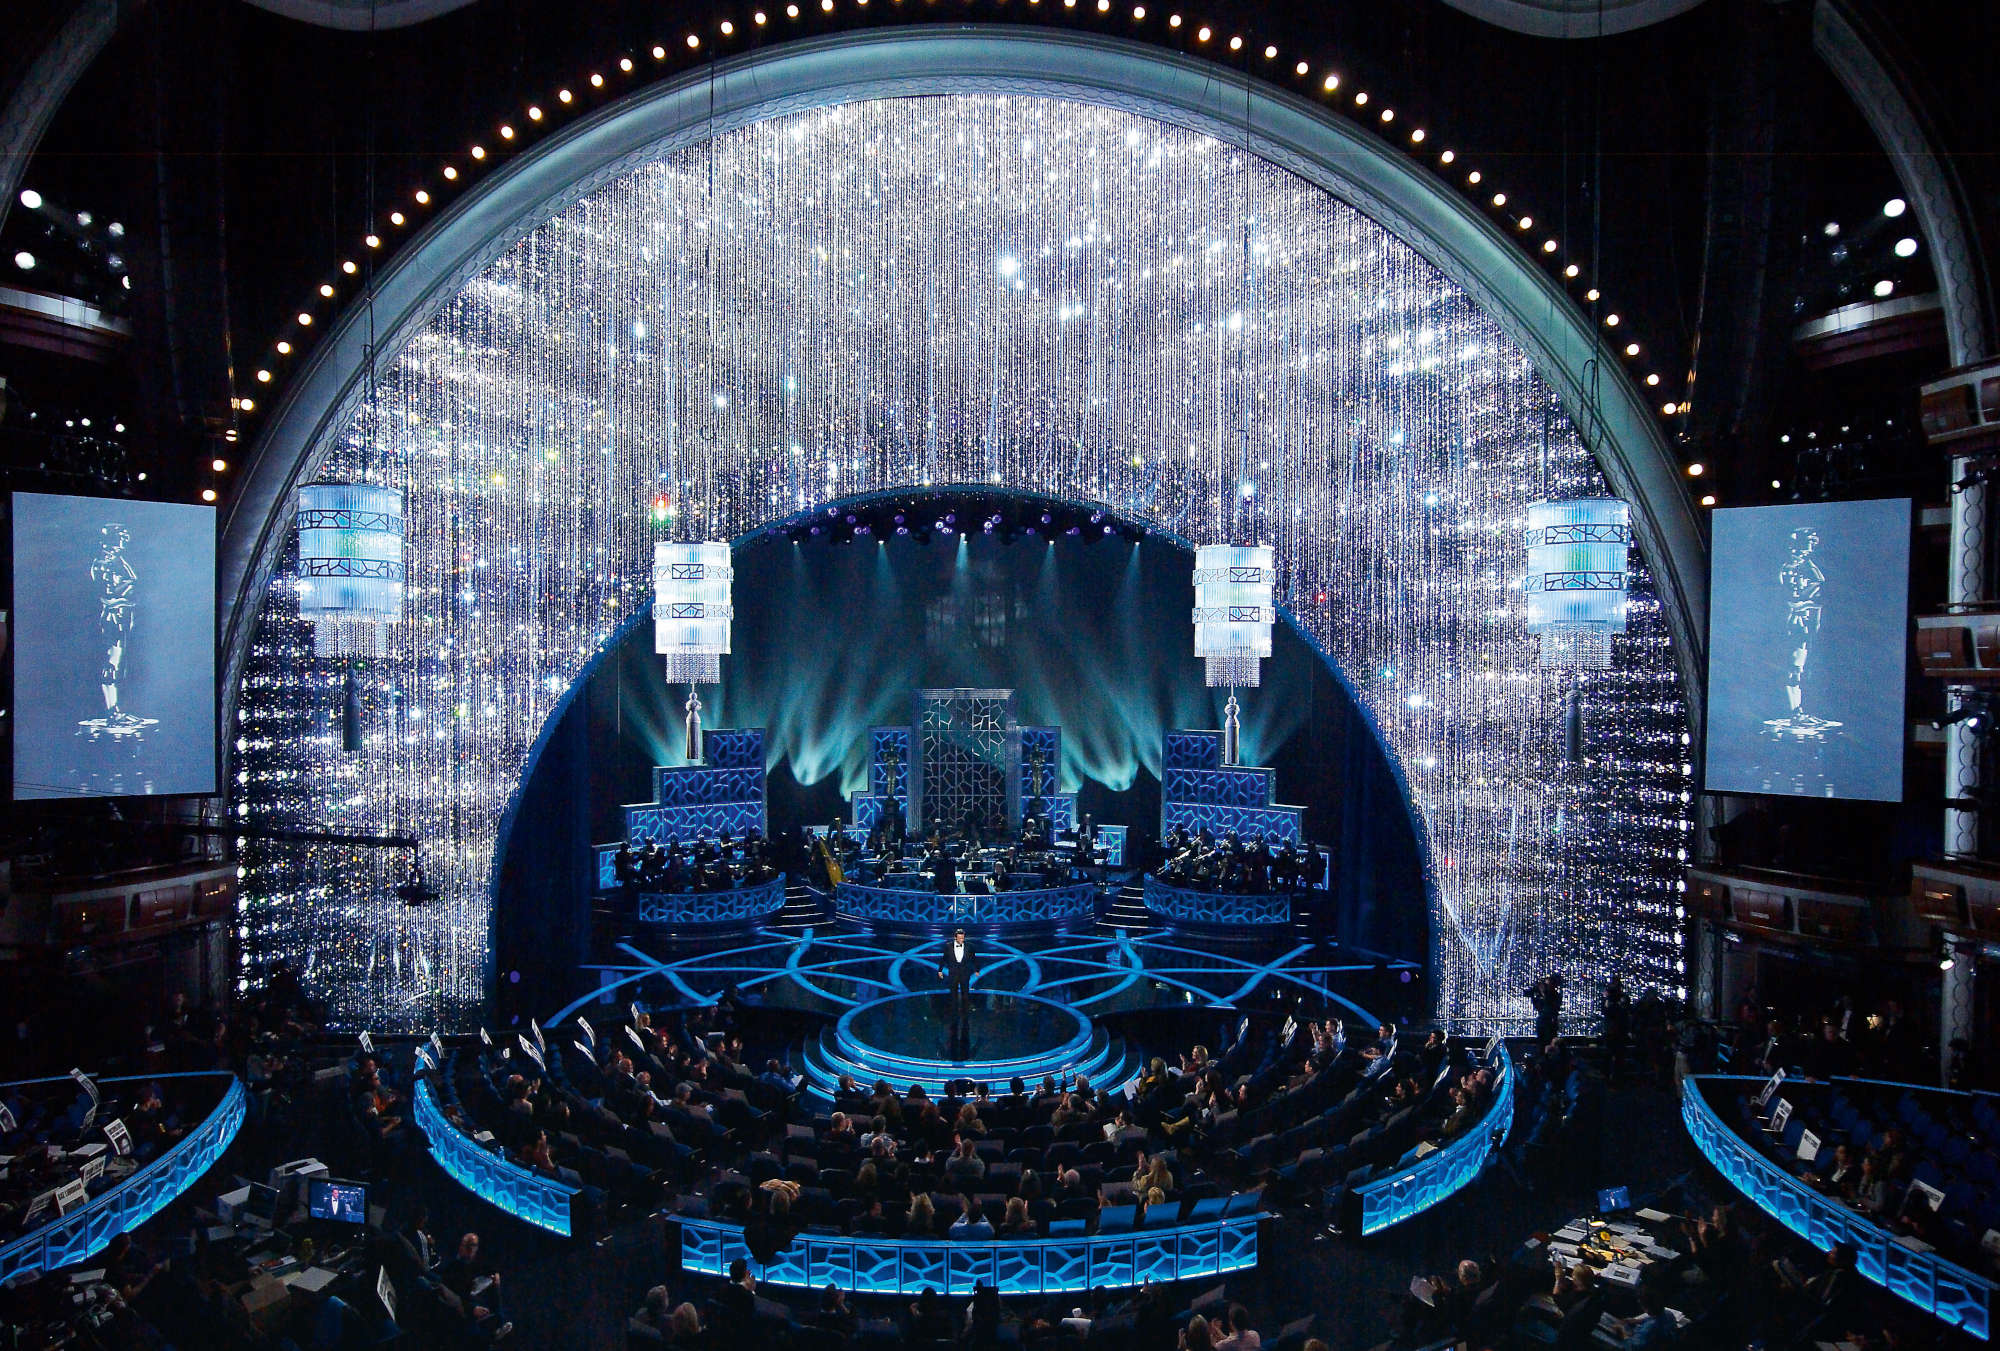 Stage design for the 81st and 82nd Academy Awards, 2008, 2009, Dolby Theatre (formerly the Kodak Theatre), Hollywood, Los Angeles. Photo by Eric Laignel